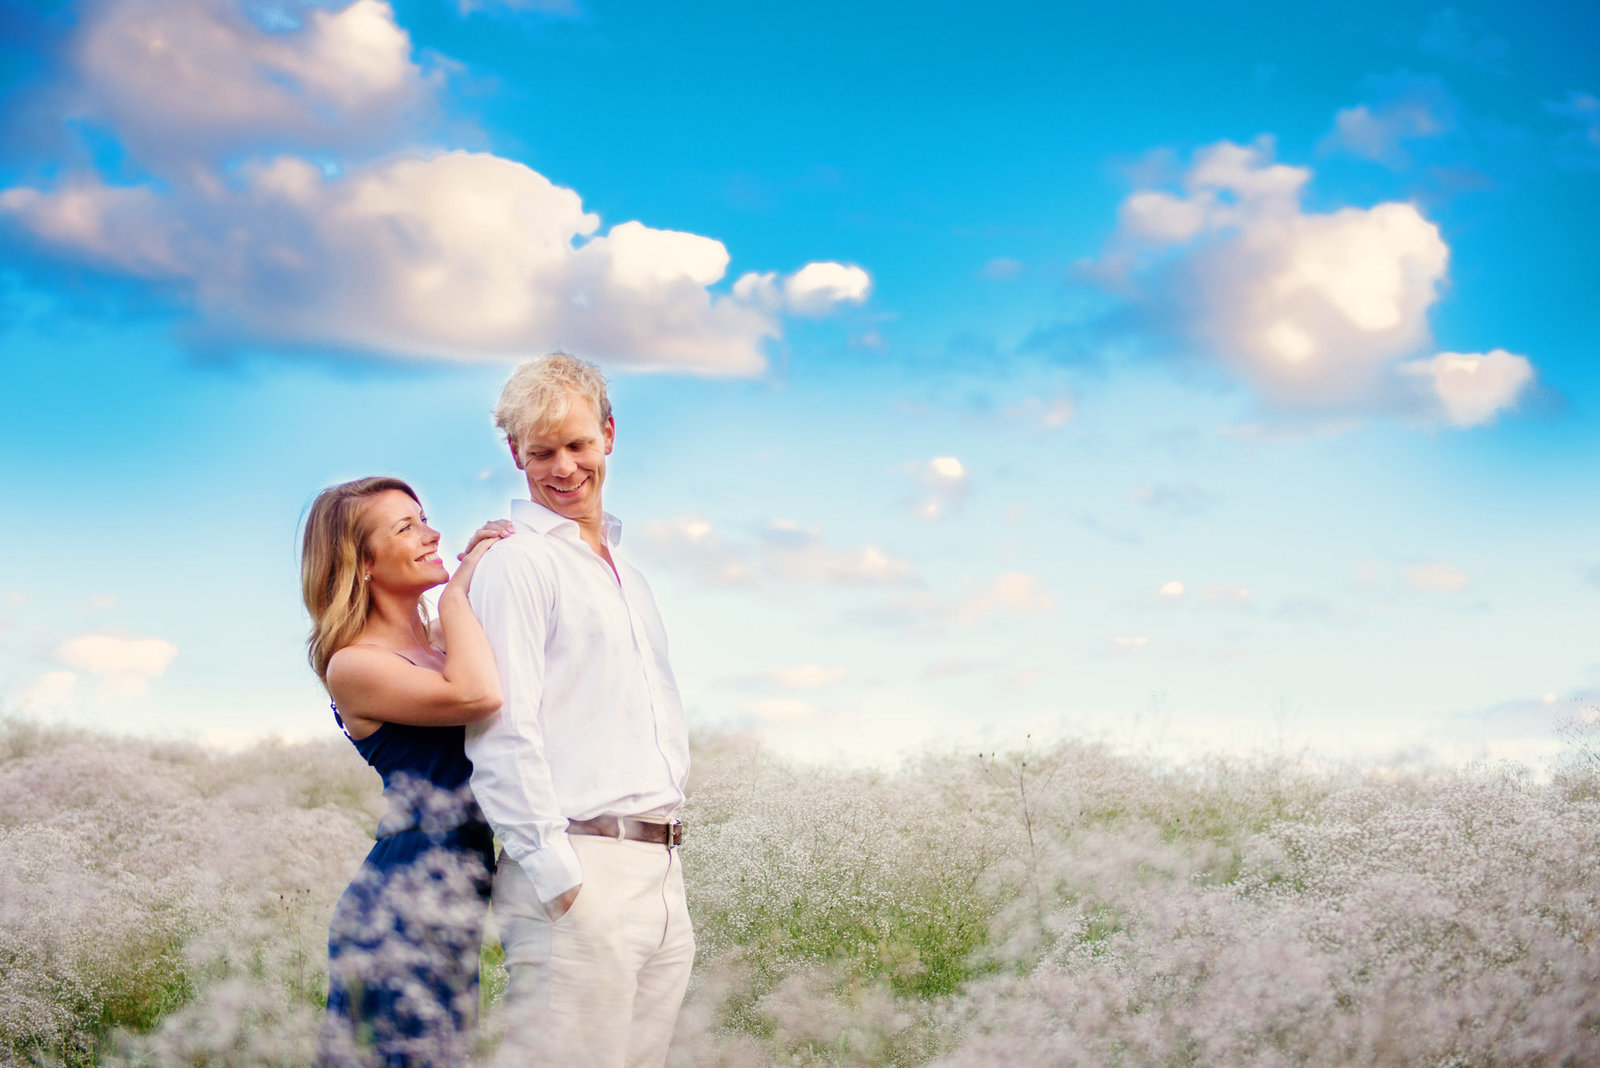 engagement photography tips for portrait session in traverse city michigan